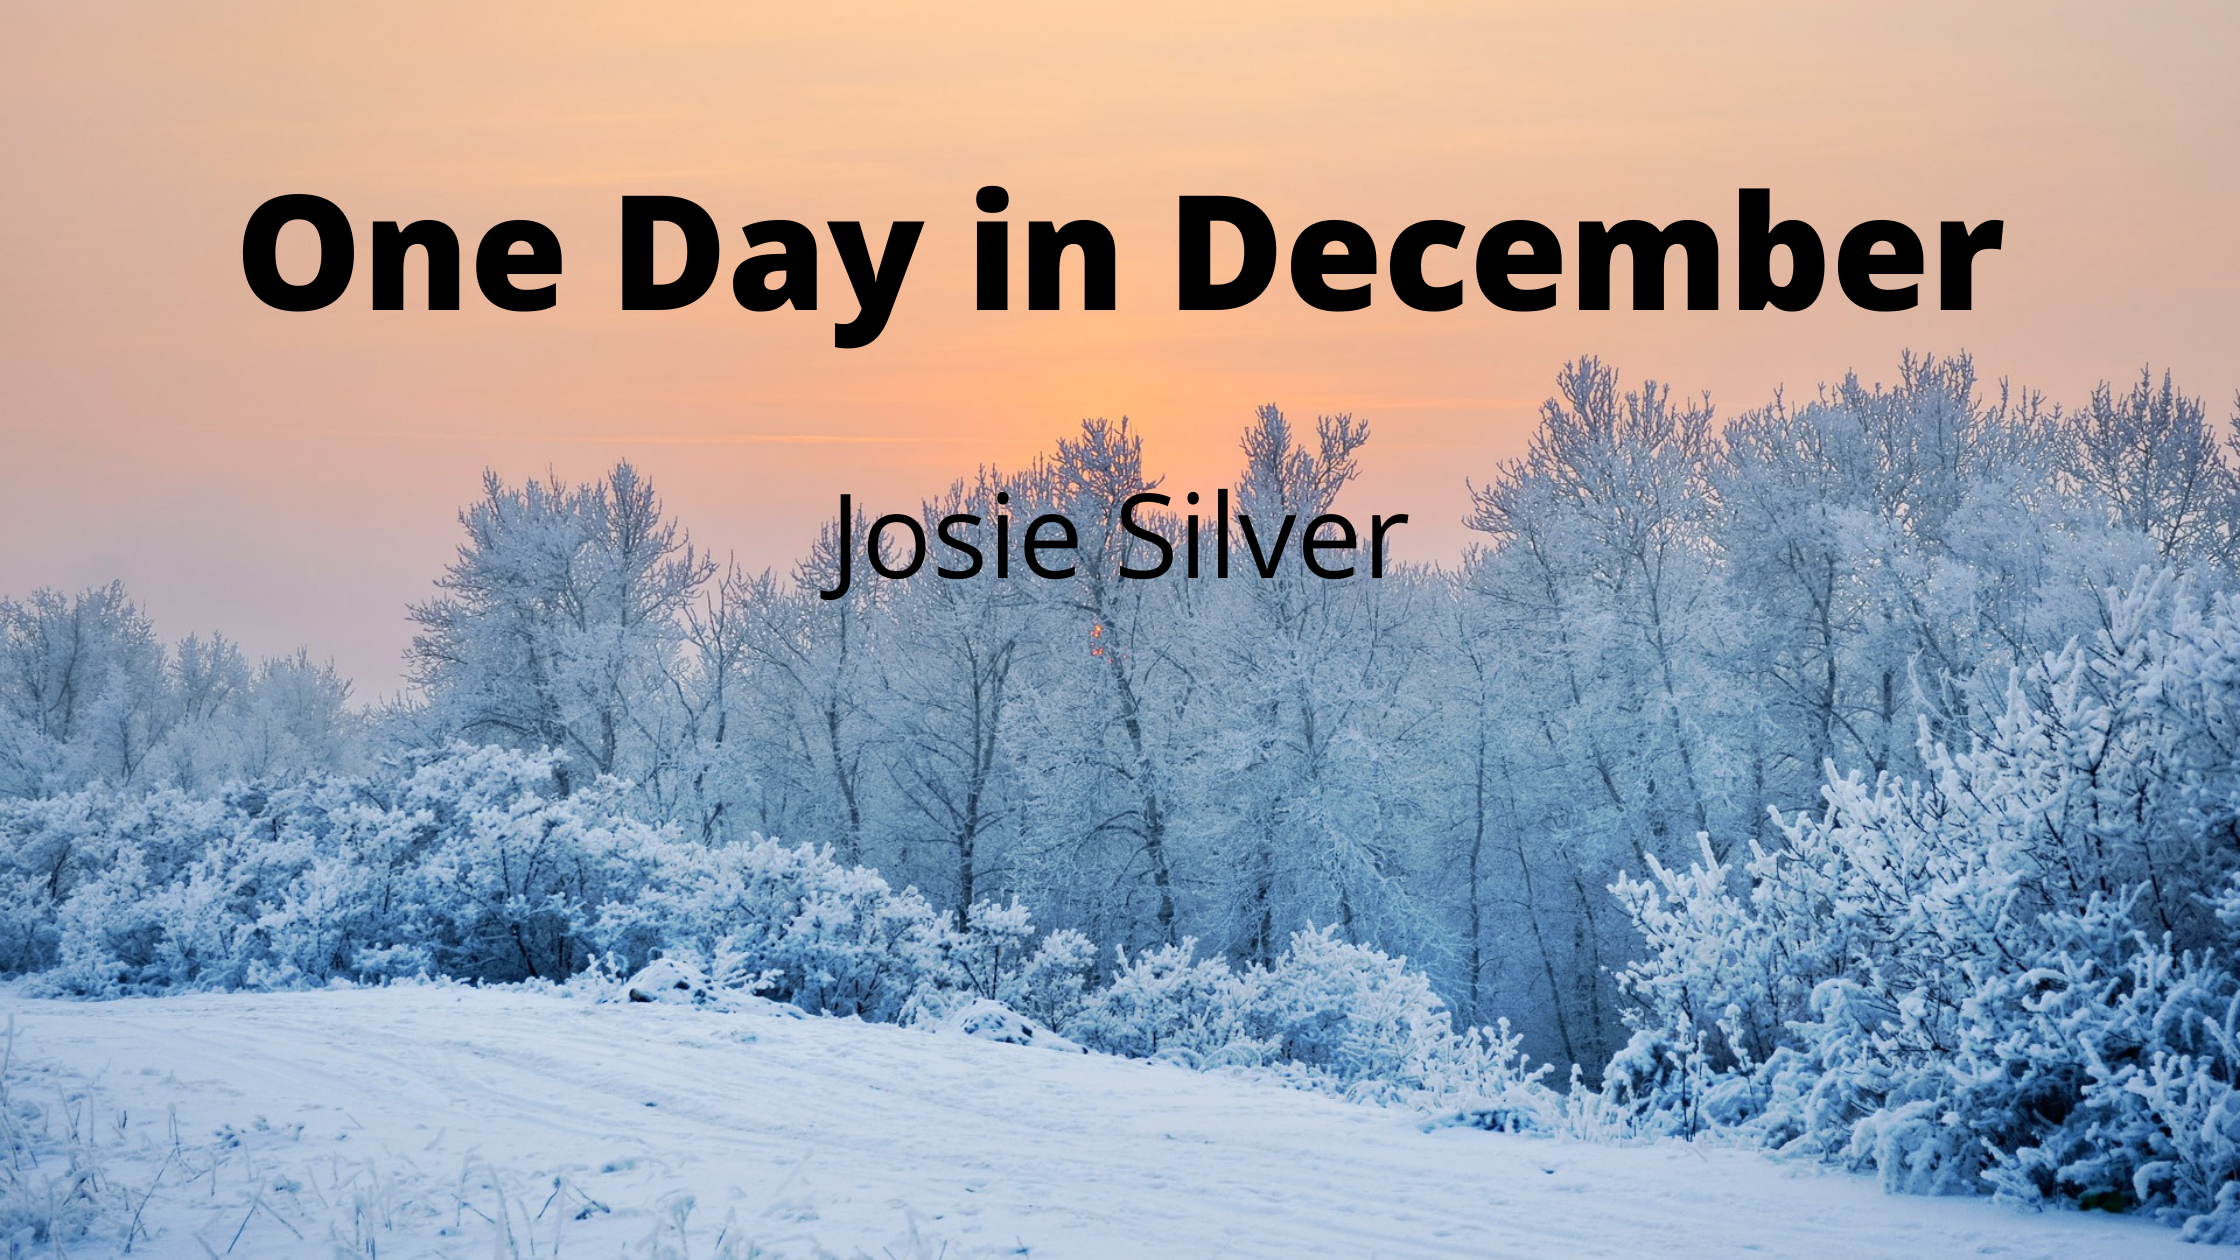 Book Review: One Day in December by Josie Silver